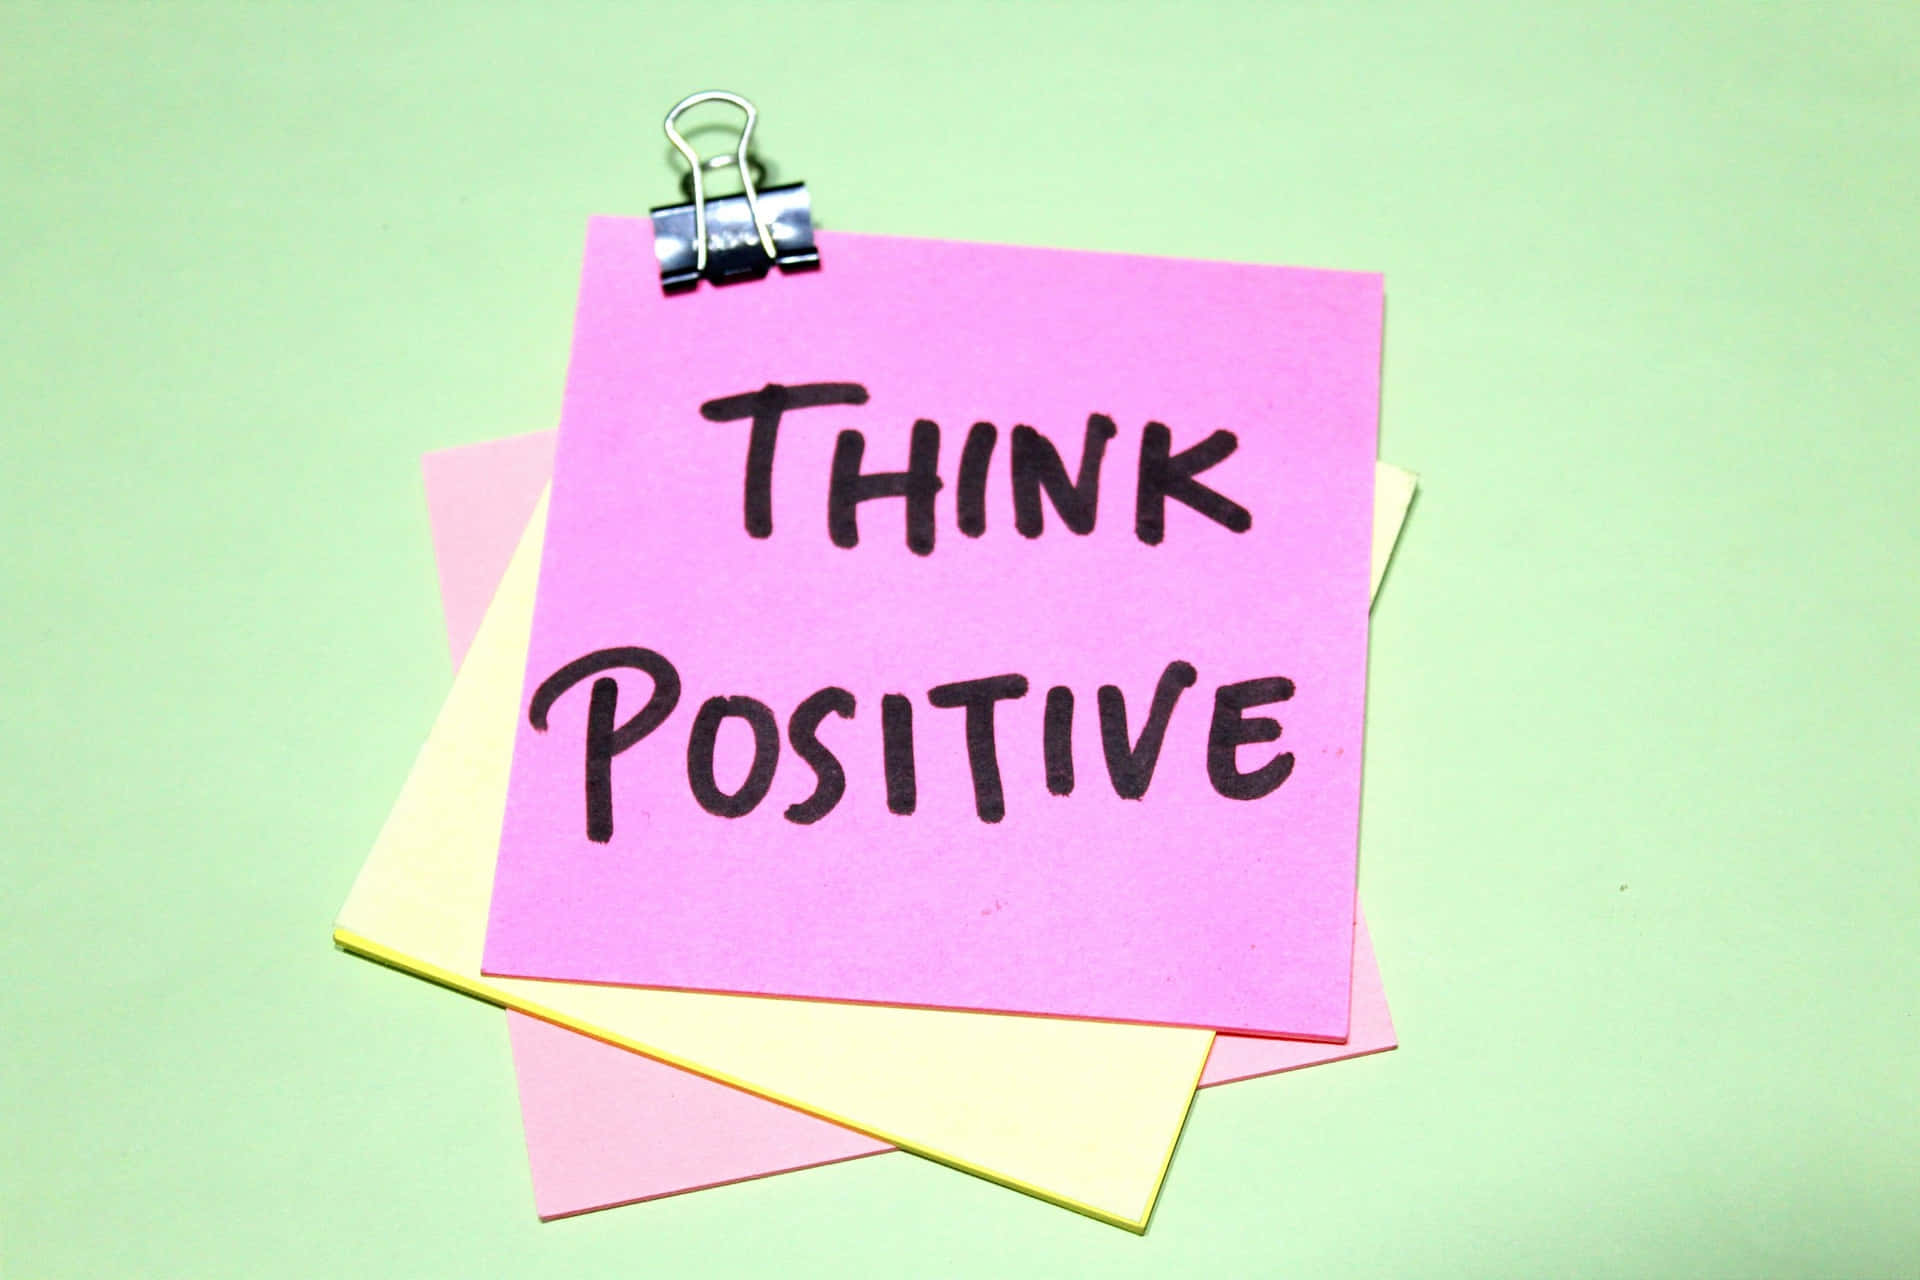 Think Positive Note Clippedto Paper Stack Wallpaper